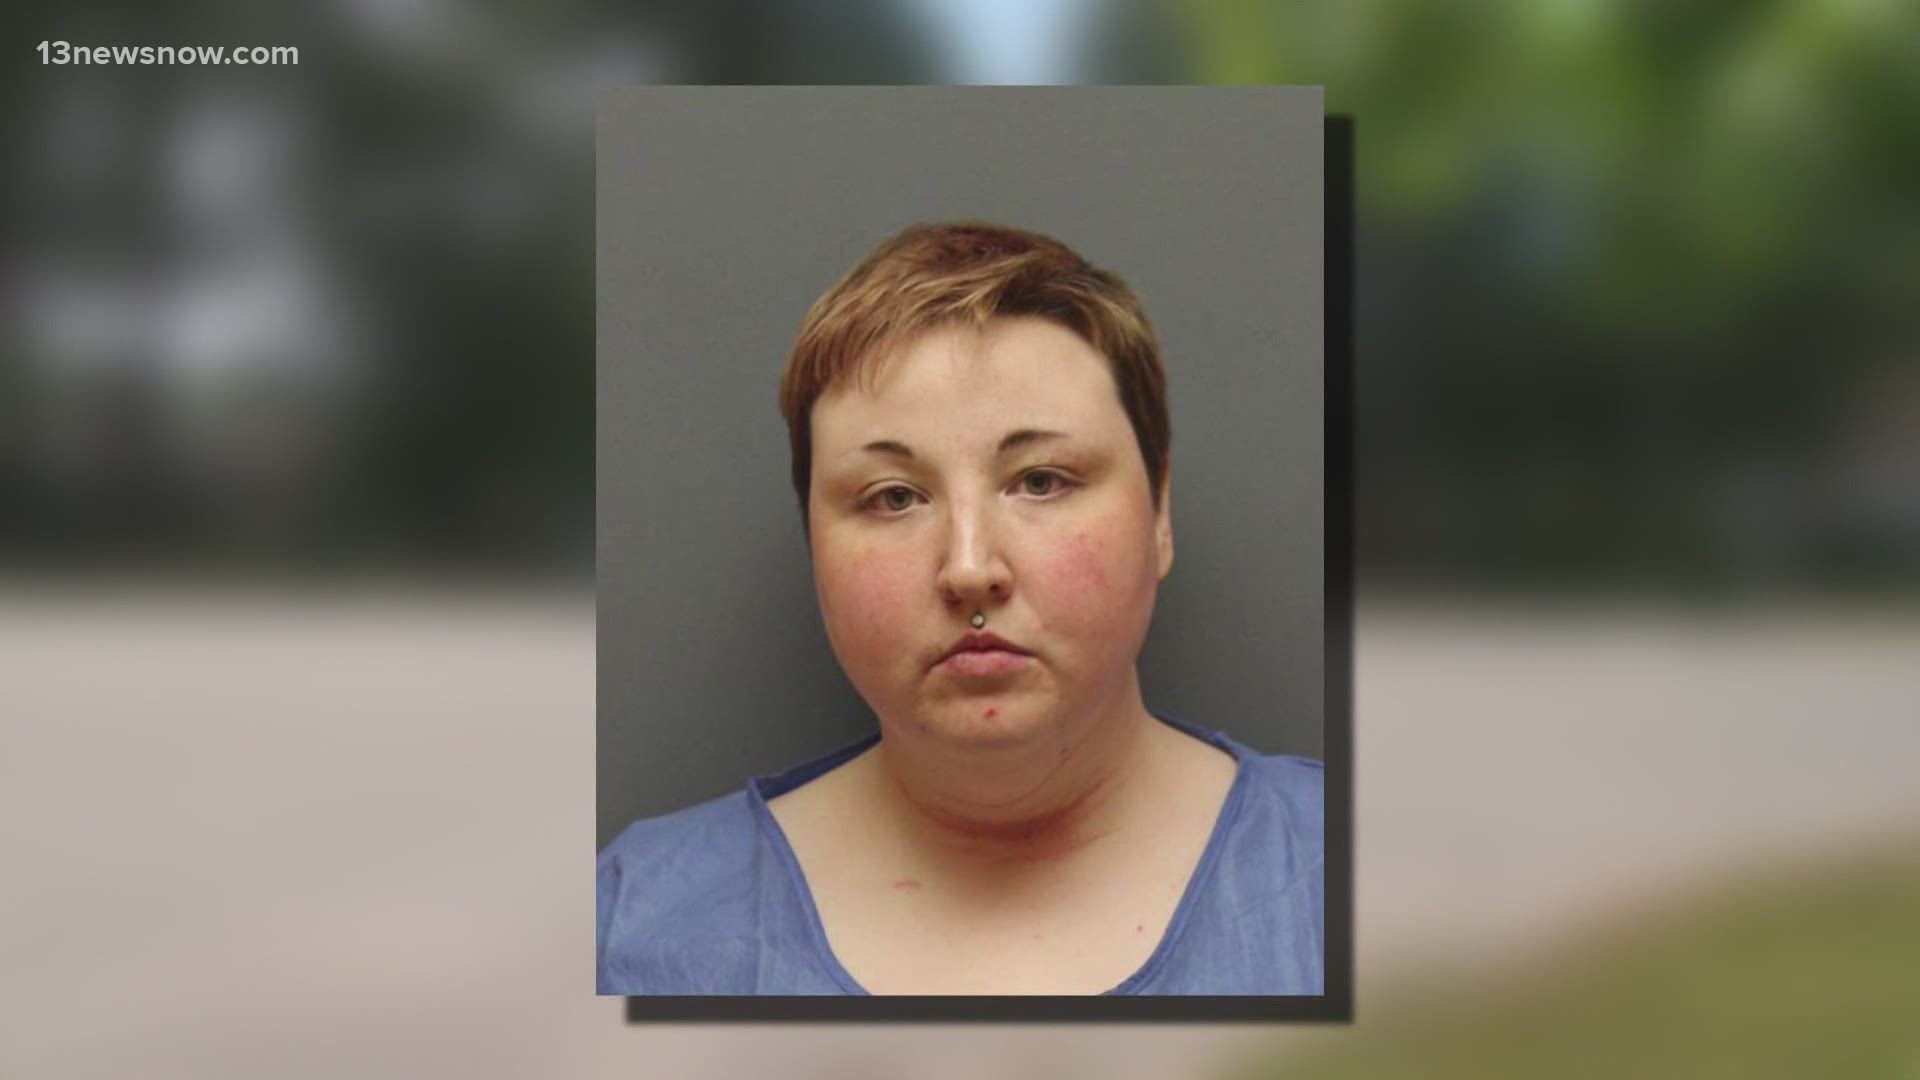 Police said Sarah Ganoe, 35, killed her 10-month-old boy and critically injured her 8-year-old daughter. Officers found the children with several stab wounds.